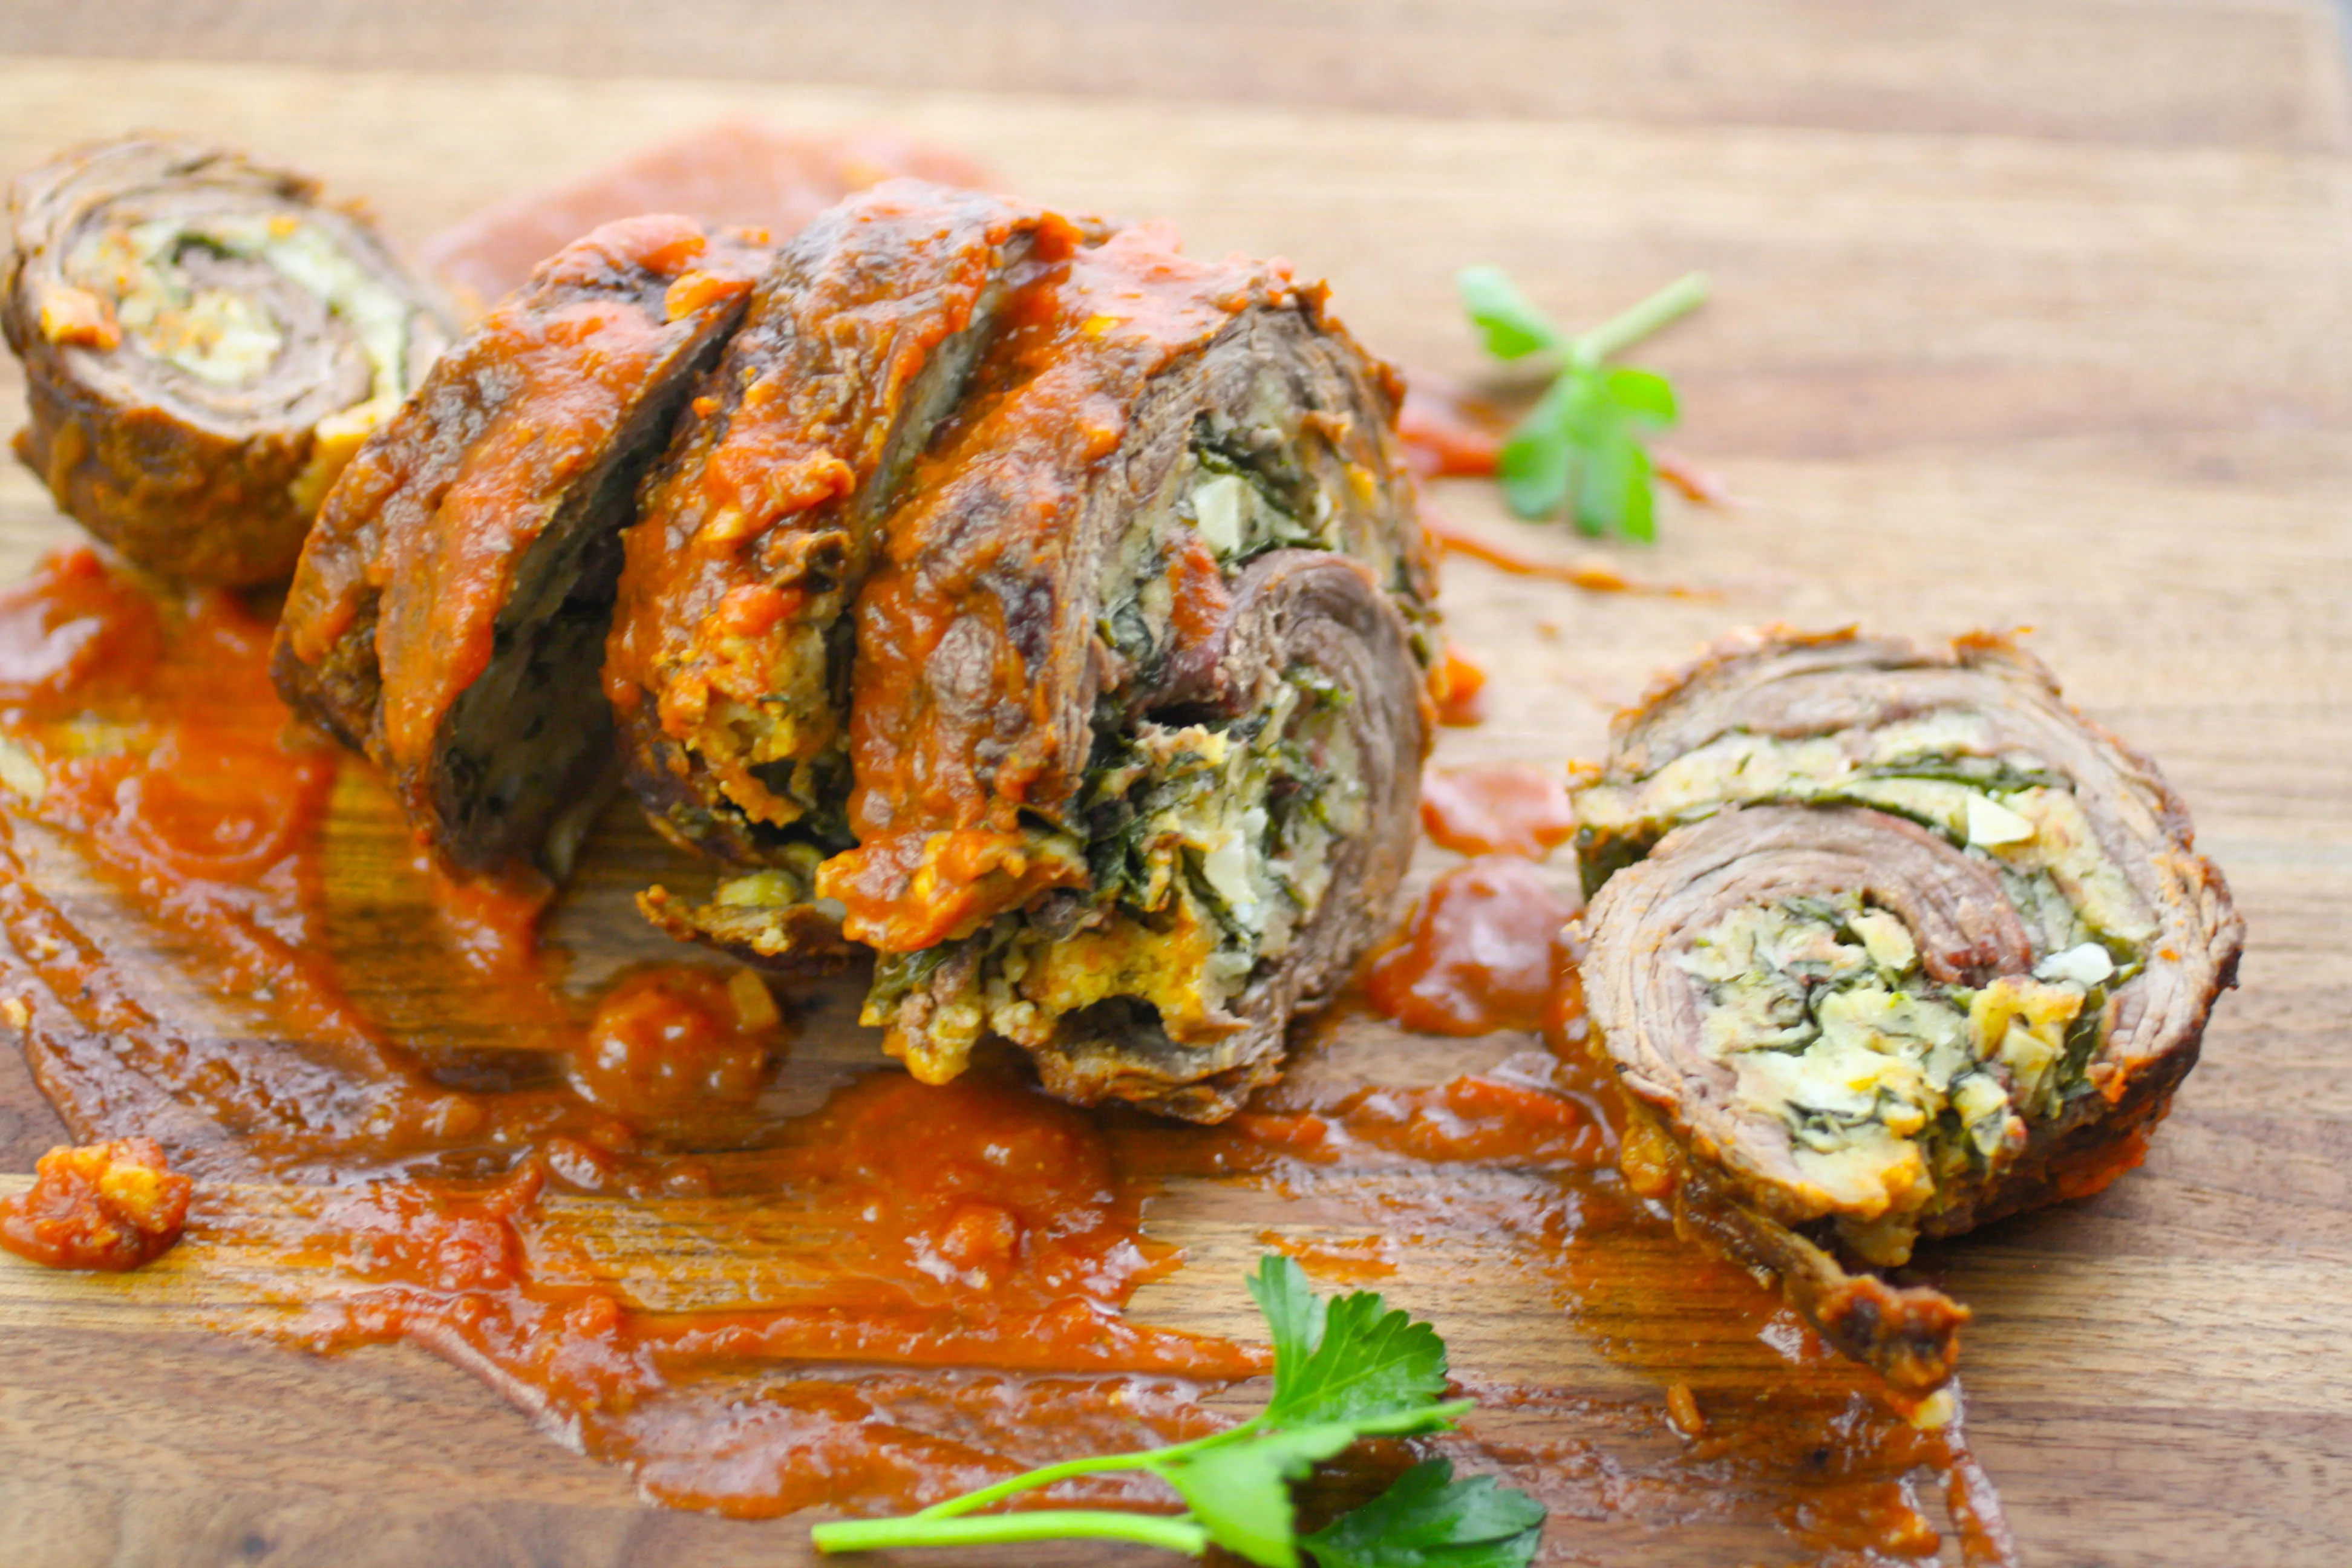 Beef Braciole makes a lovely special meal. Beef Braciole is a classic Italian dish you'll love.